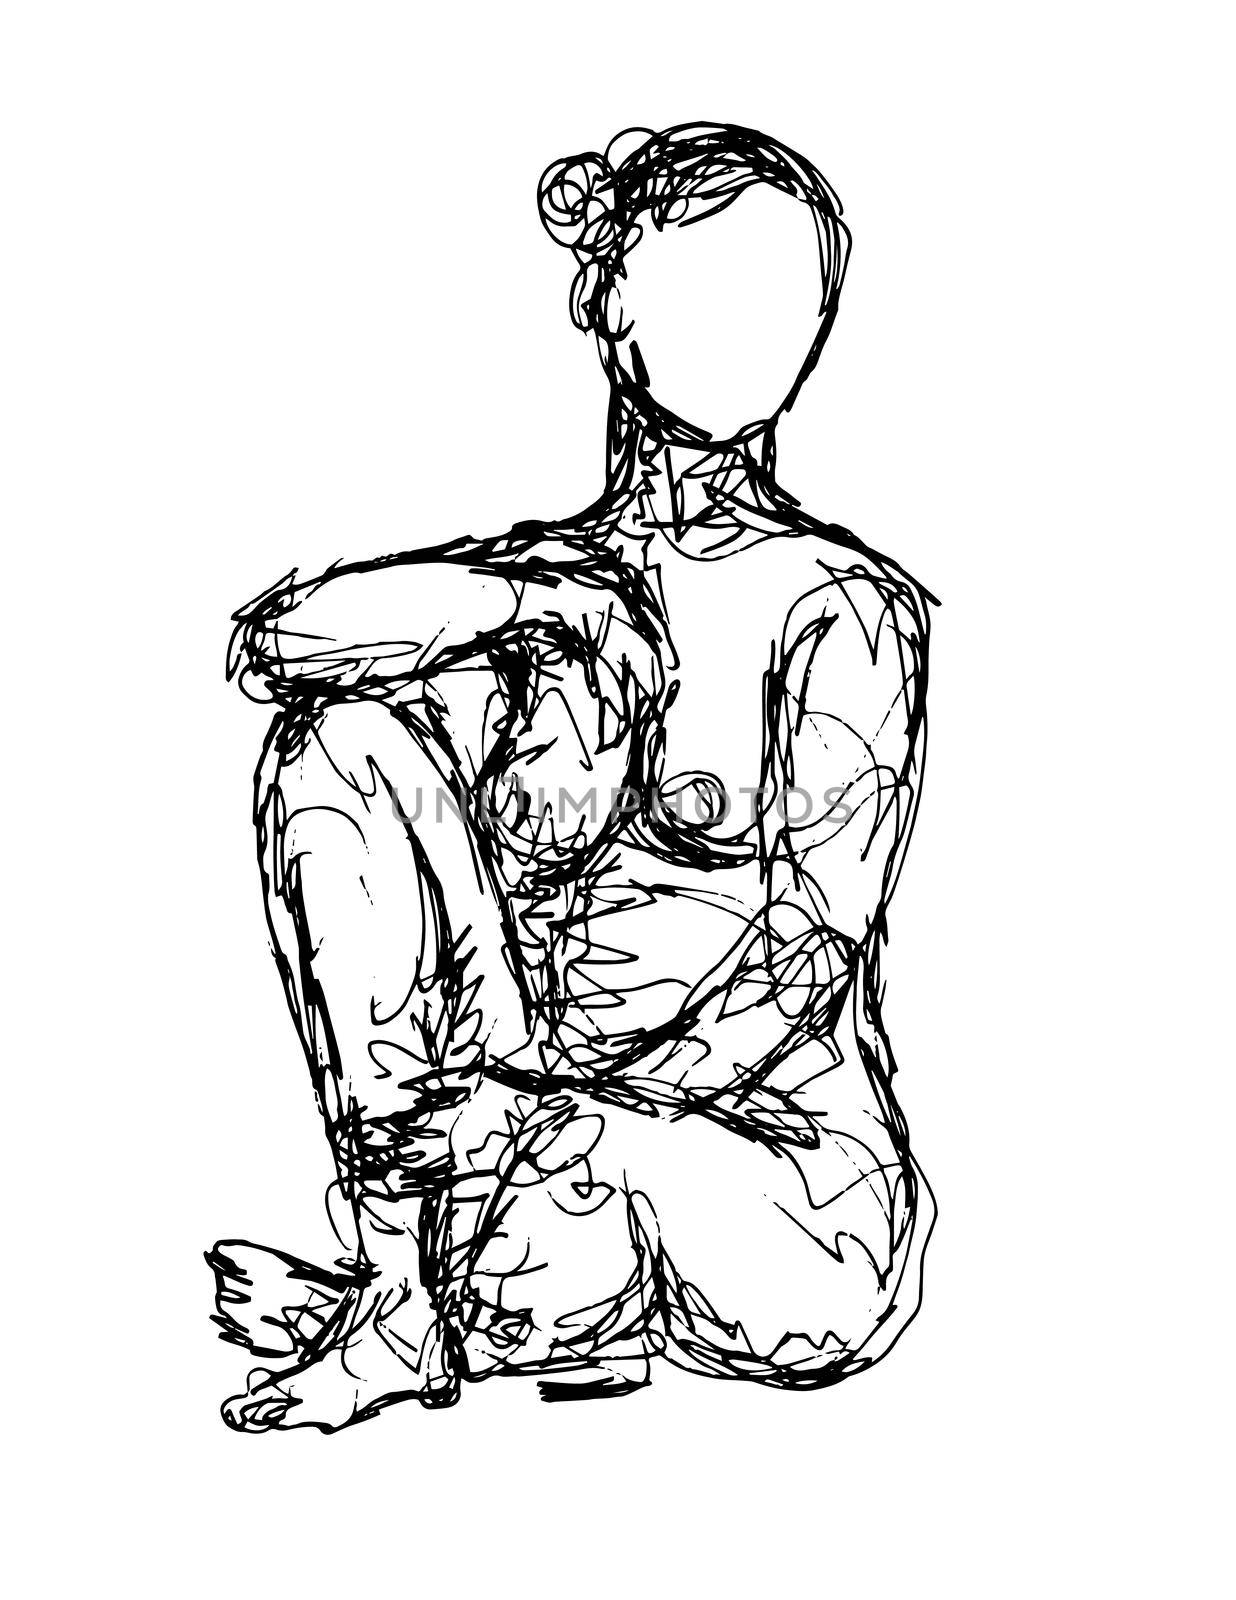 Nude Female Human Figure Posing Hook Sitting Doodle Art Continuous Line Drawing  by patrimonio